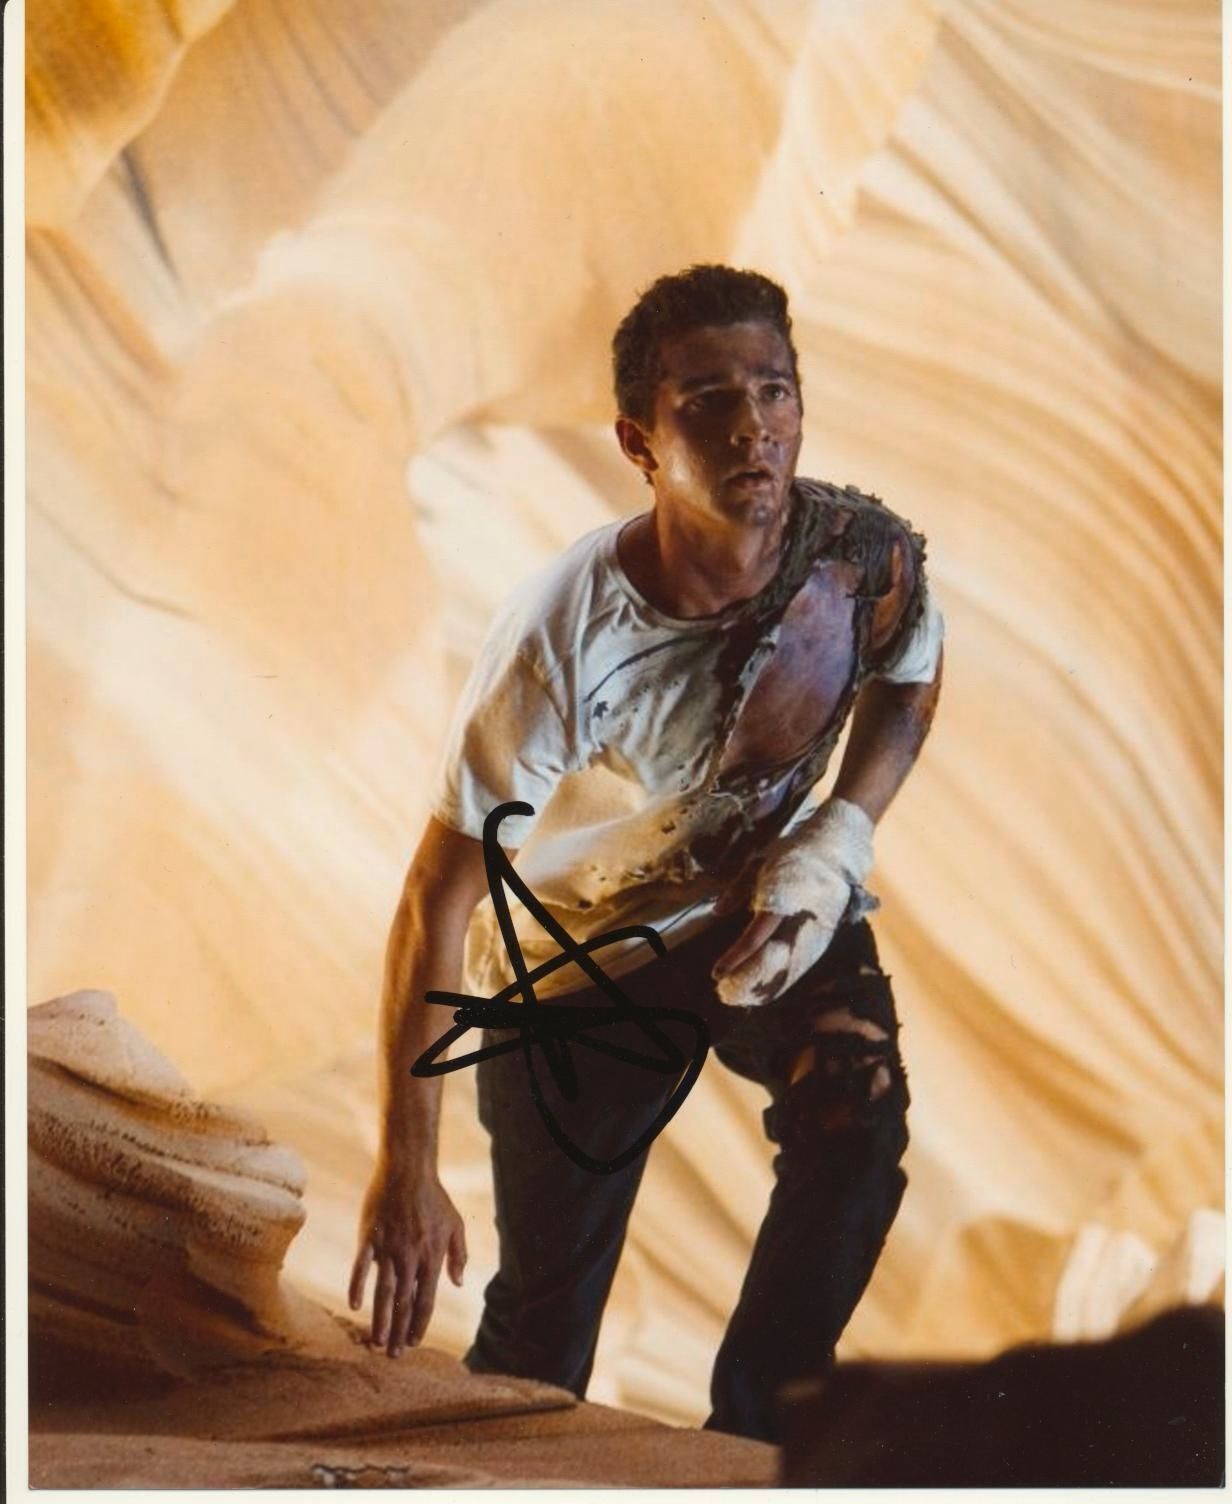 Shia LaBeouf Autograph TRANSFORMERS Signed 10x8 Photo Poster painting AFTAL [1888]